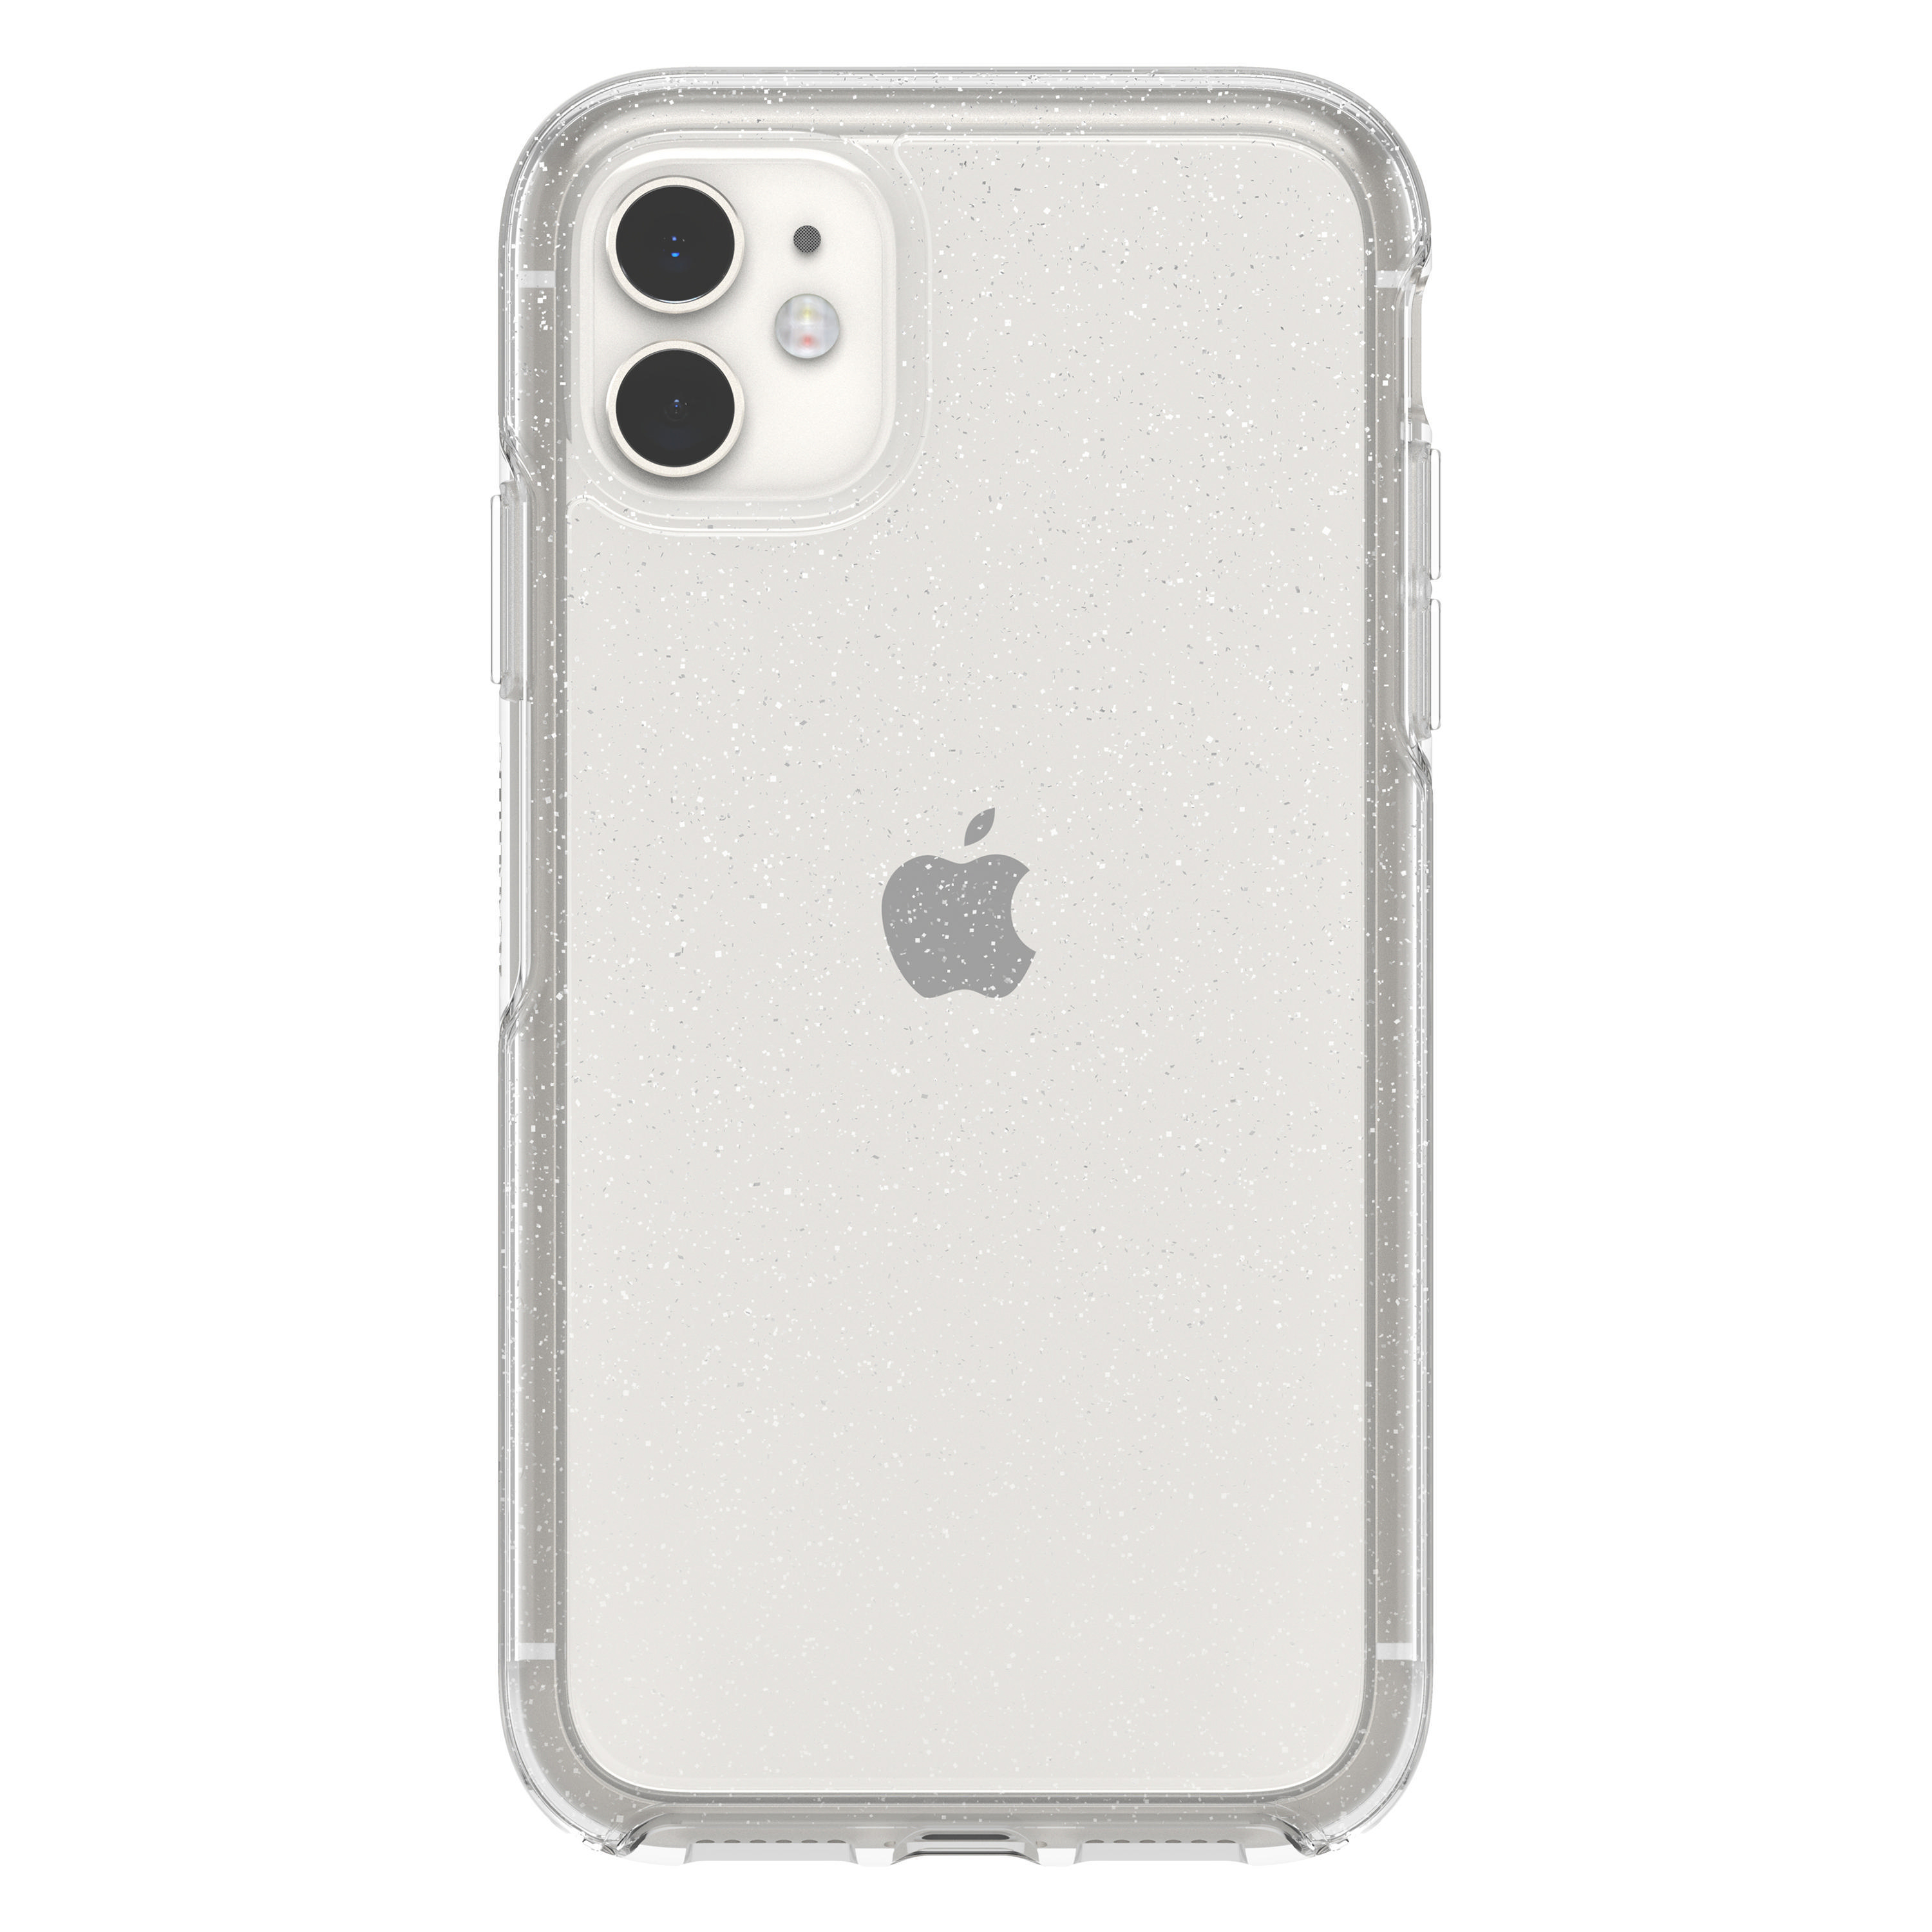 Symmetry, Apple, iPhone Backcover, OTTERBOX Transparent 11,